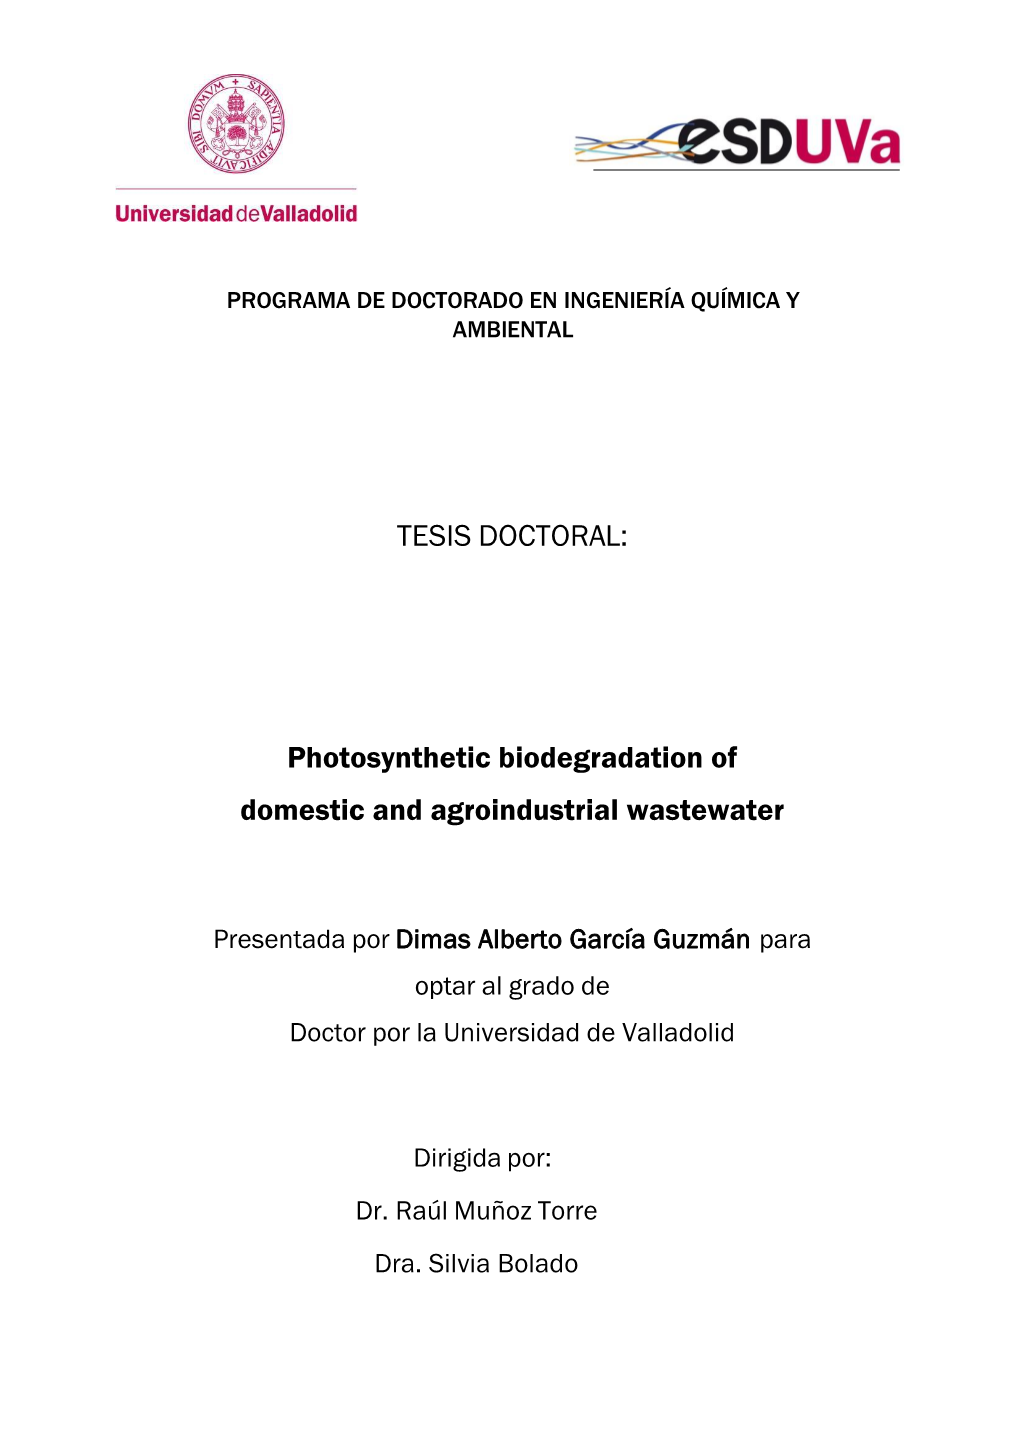 TESIS DOCTORAL: Photosynthetic Biodegradation of Domestic And